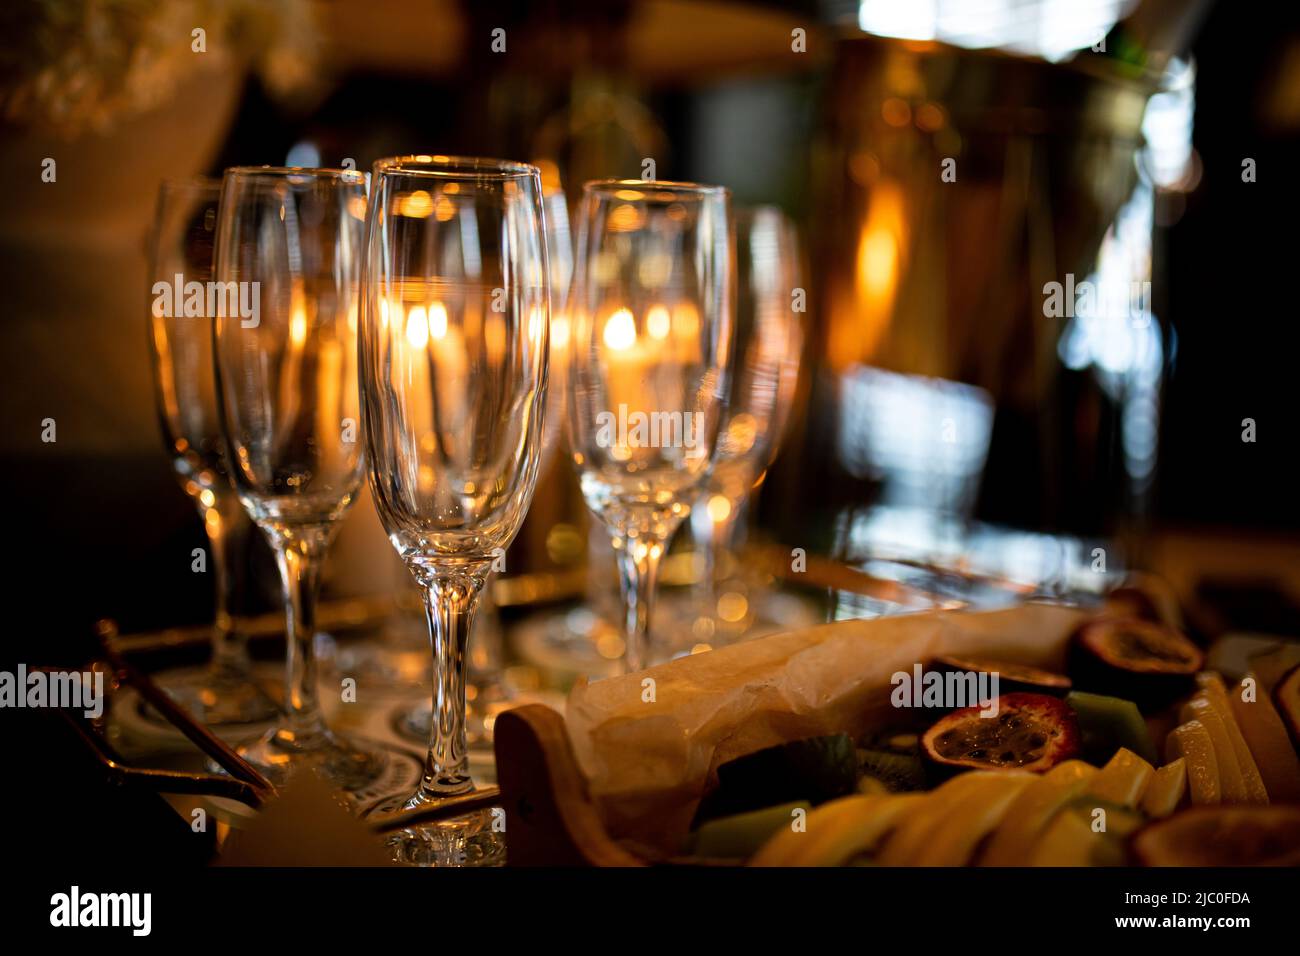 https://c8.alamy.com/comp/2JC0FDA/luxury-table-settings-for-fine-dining-with-and-glassware-pouring-wine-to-glass-beautiful-blurred-background-preparation-for-holiday-wedding-fancy-2JC0FDA.jpg